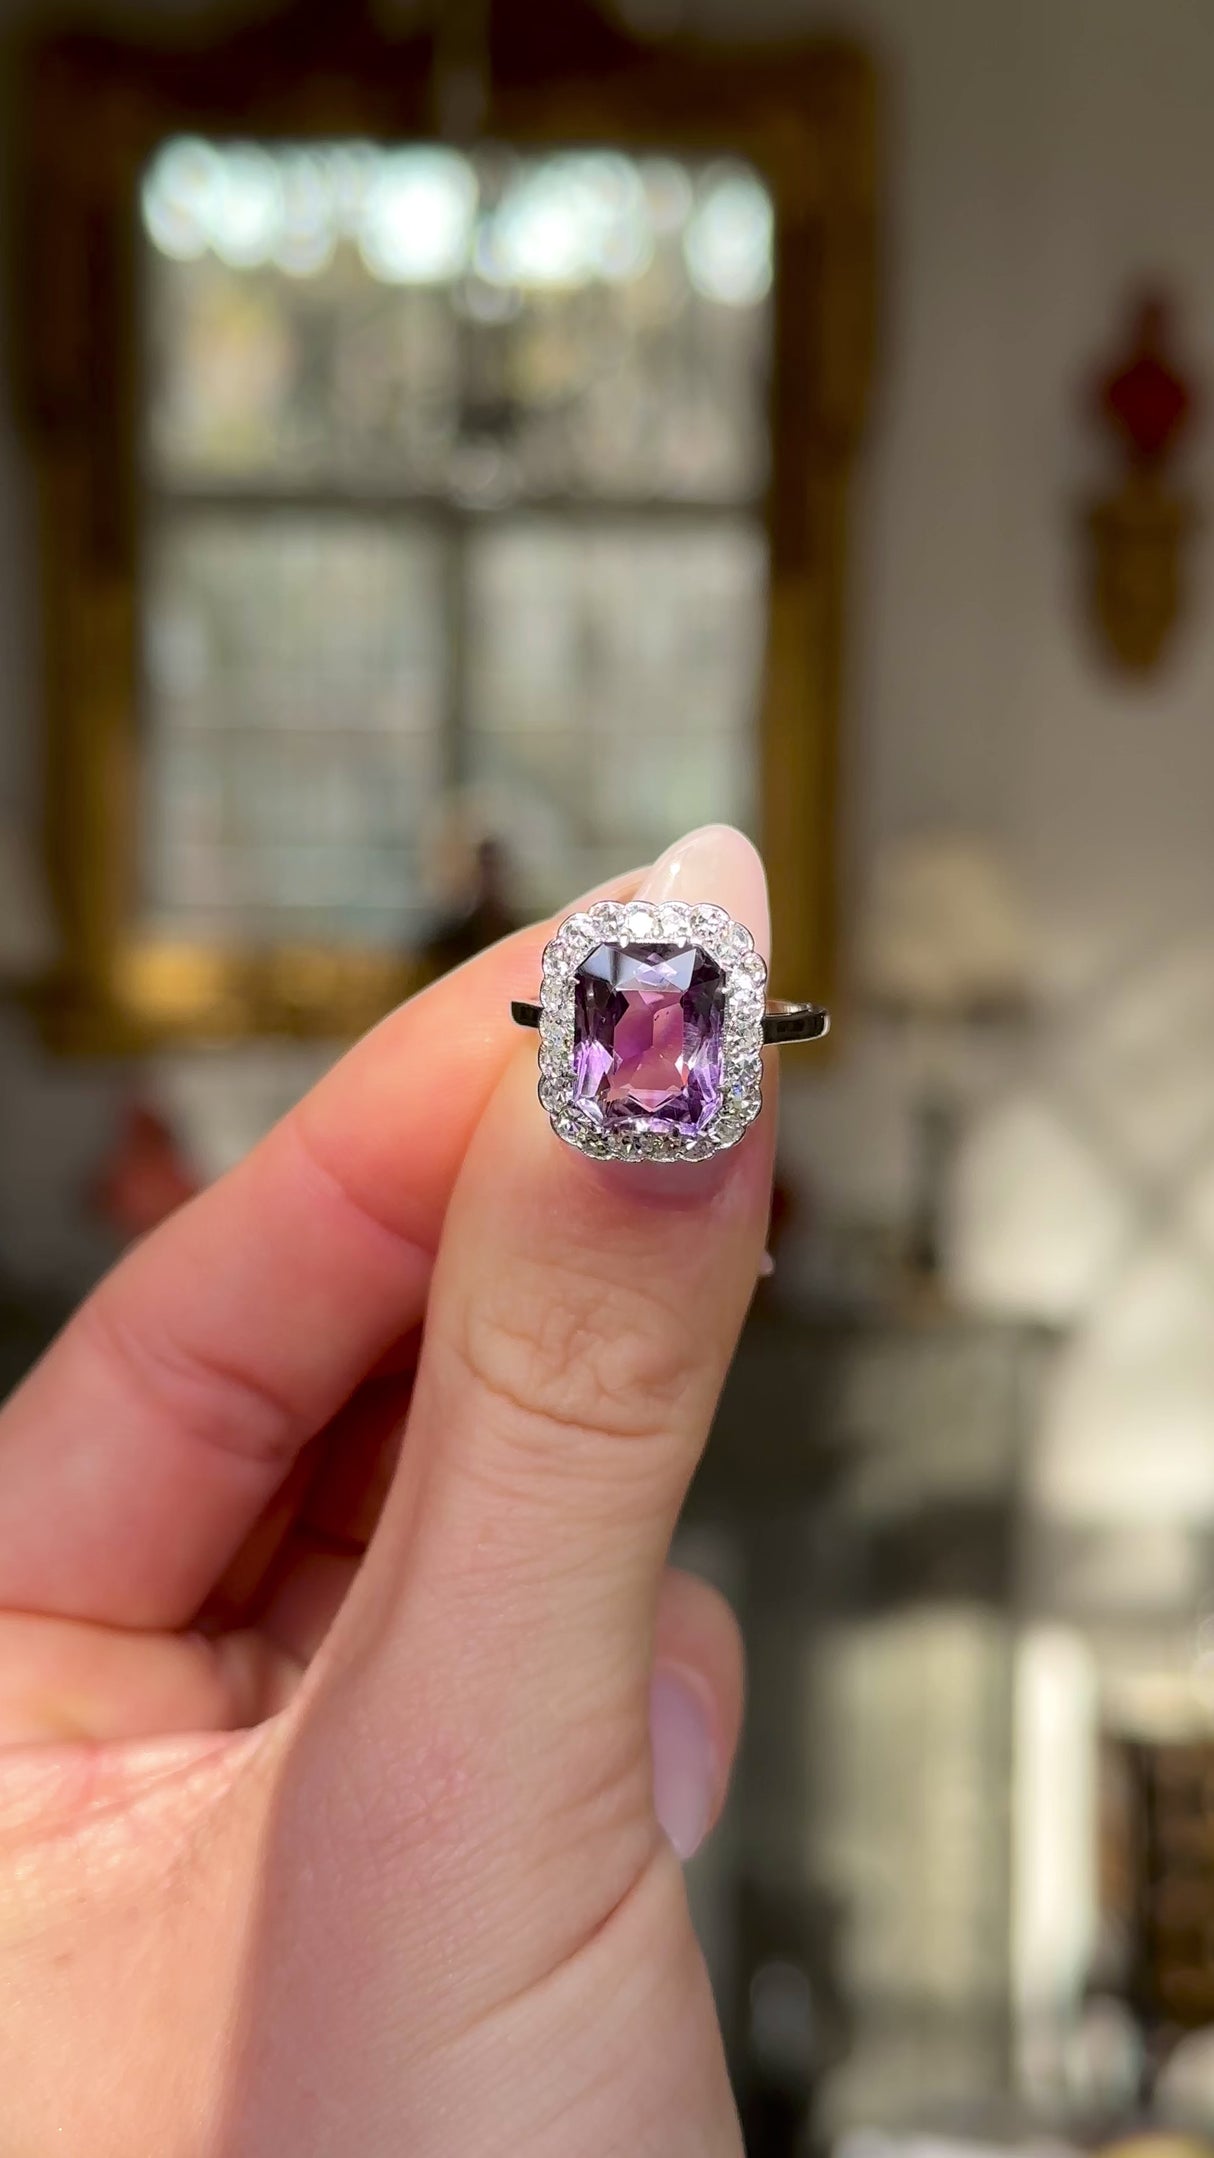 antique belle epoque amethyst and diamond cluster ring held in fingers and moved around to give perspective.